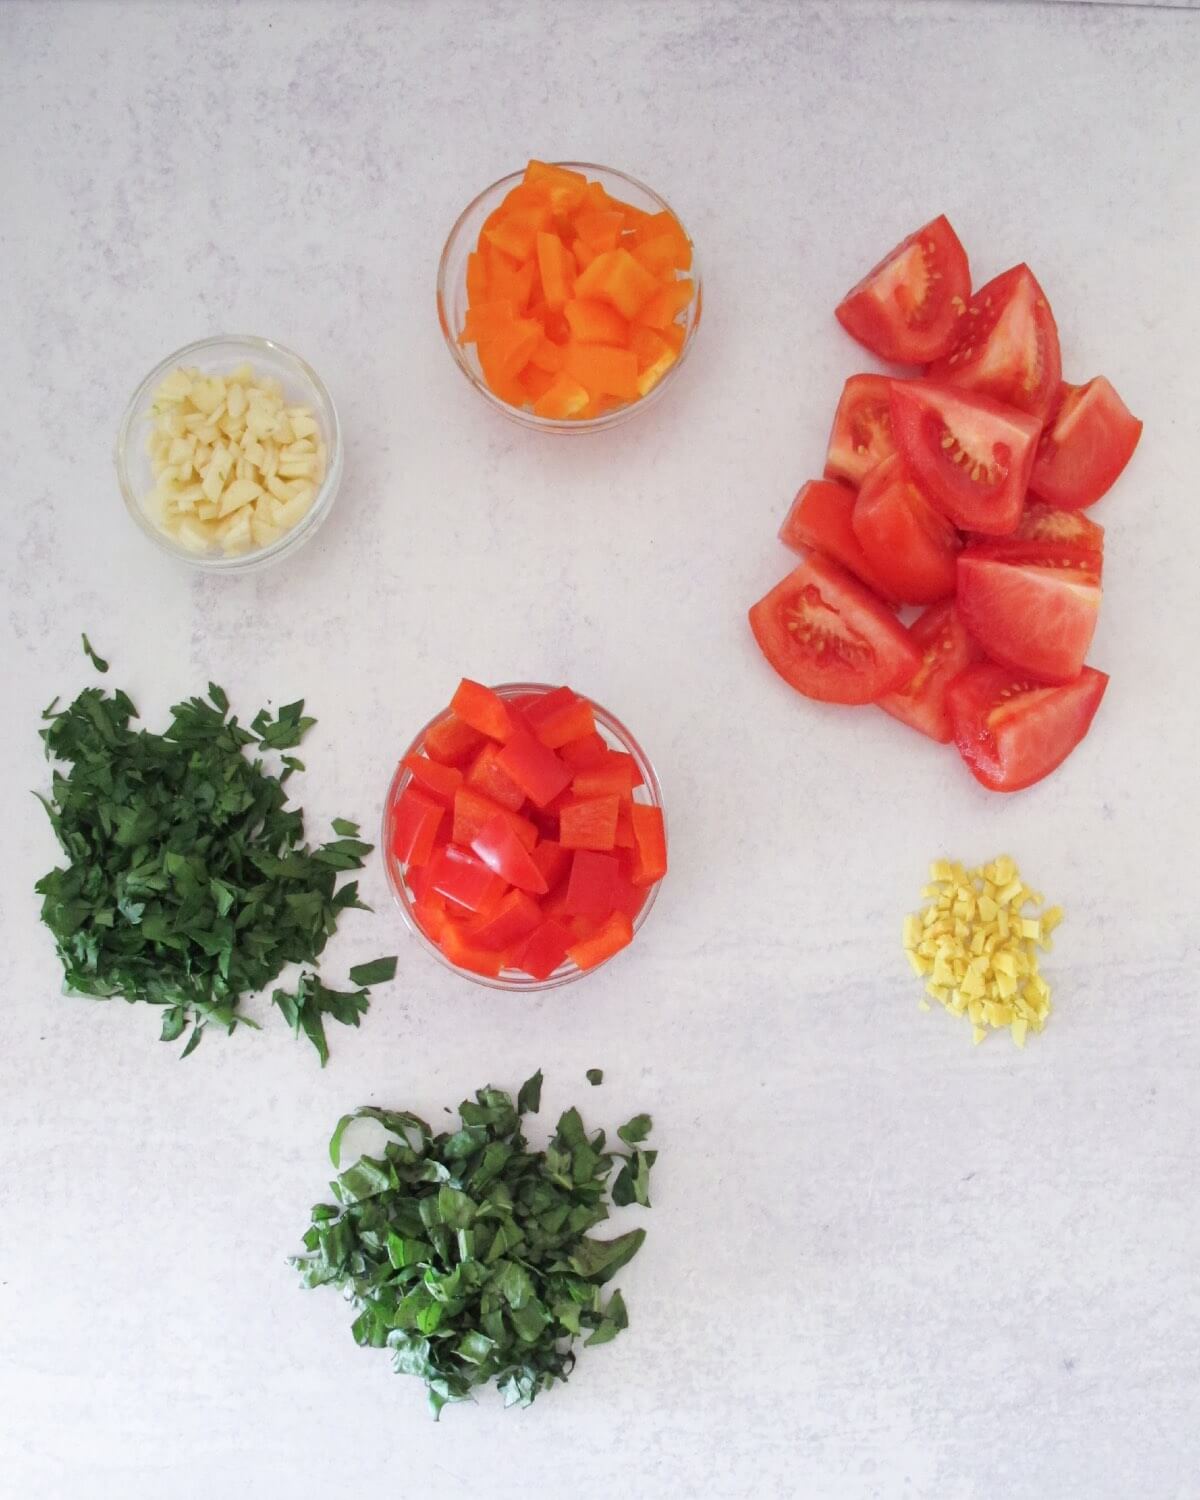 chopped parsley, basil, tomatoes, ginger, red peppers, and orange peppers.